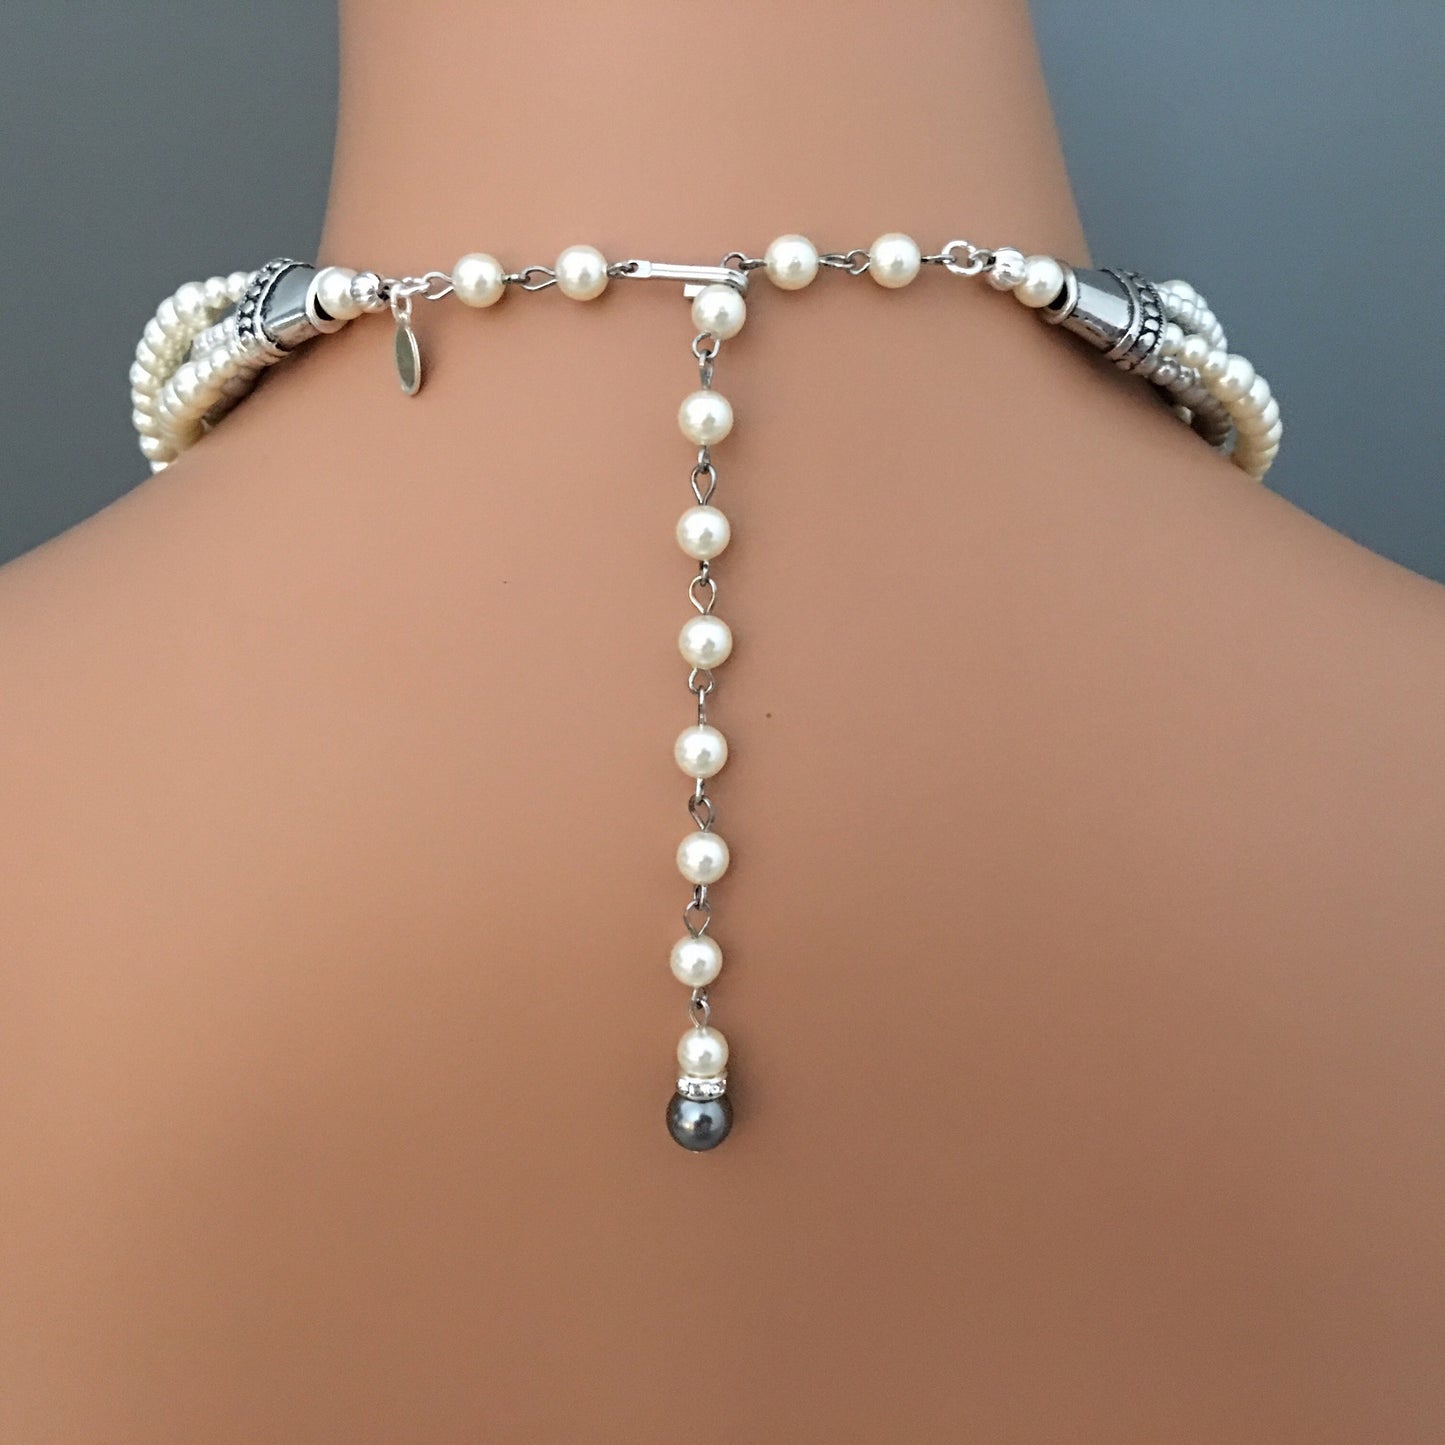 Grey Pearl Necklace Set Necklace with Brooch and Earrings Dark Grey Light Gray Ivory twisted Swarovski Pearls Rhinestone mother of the bride